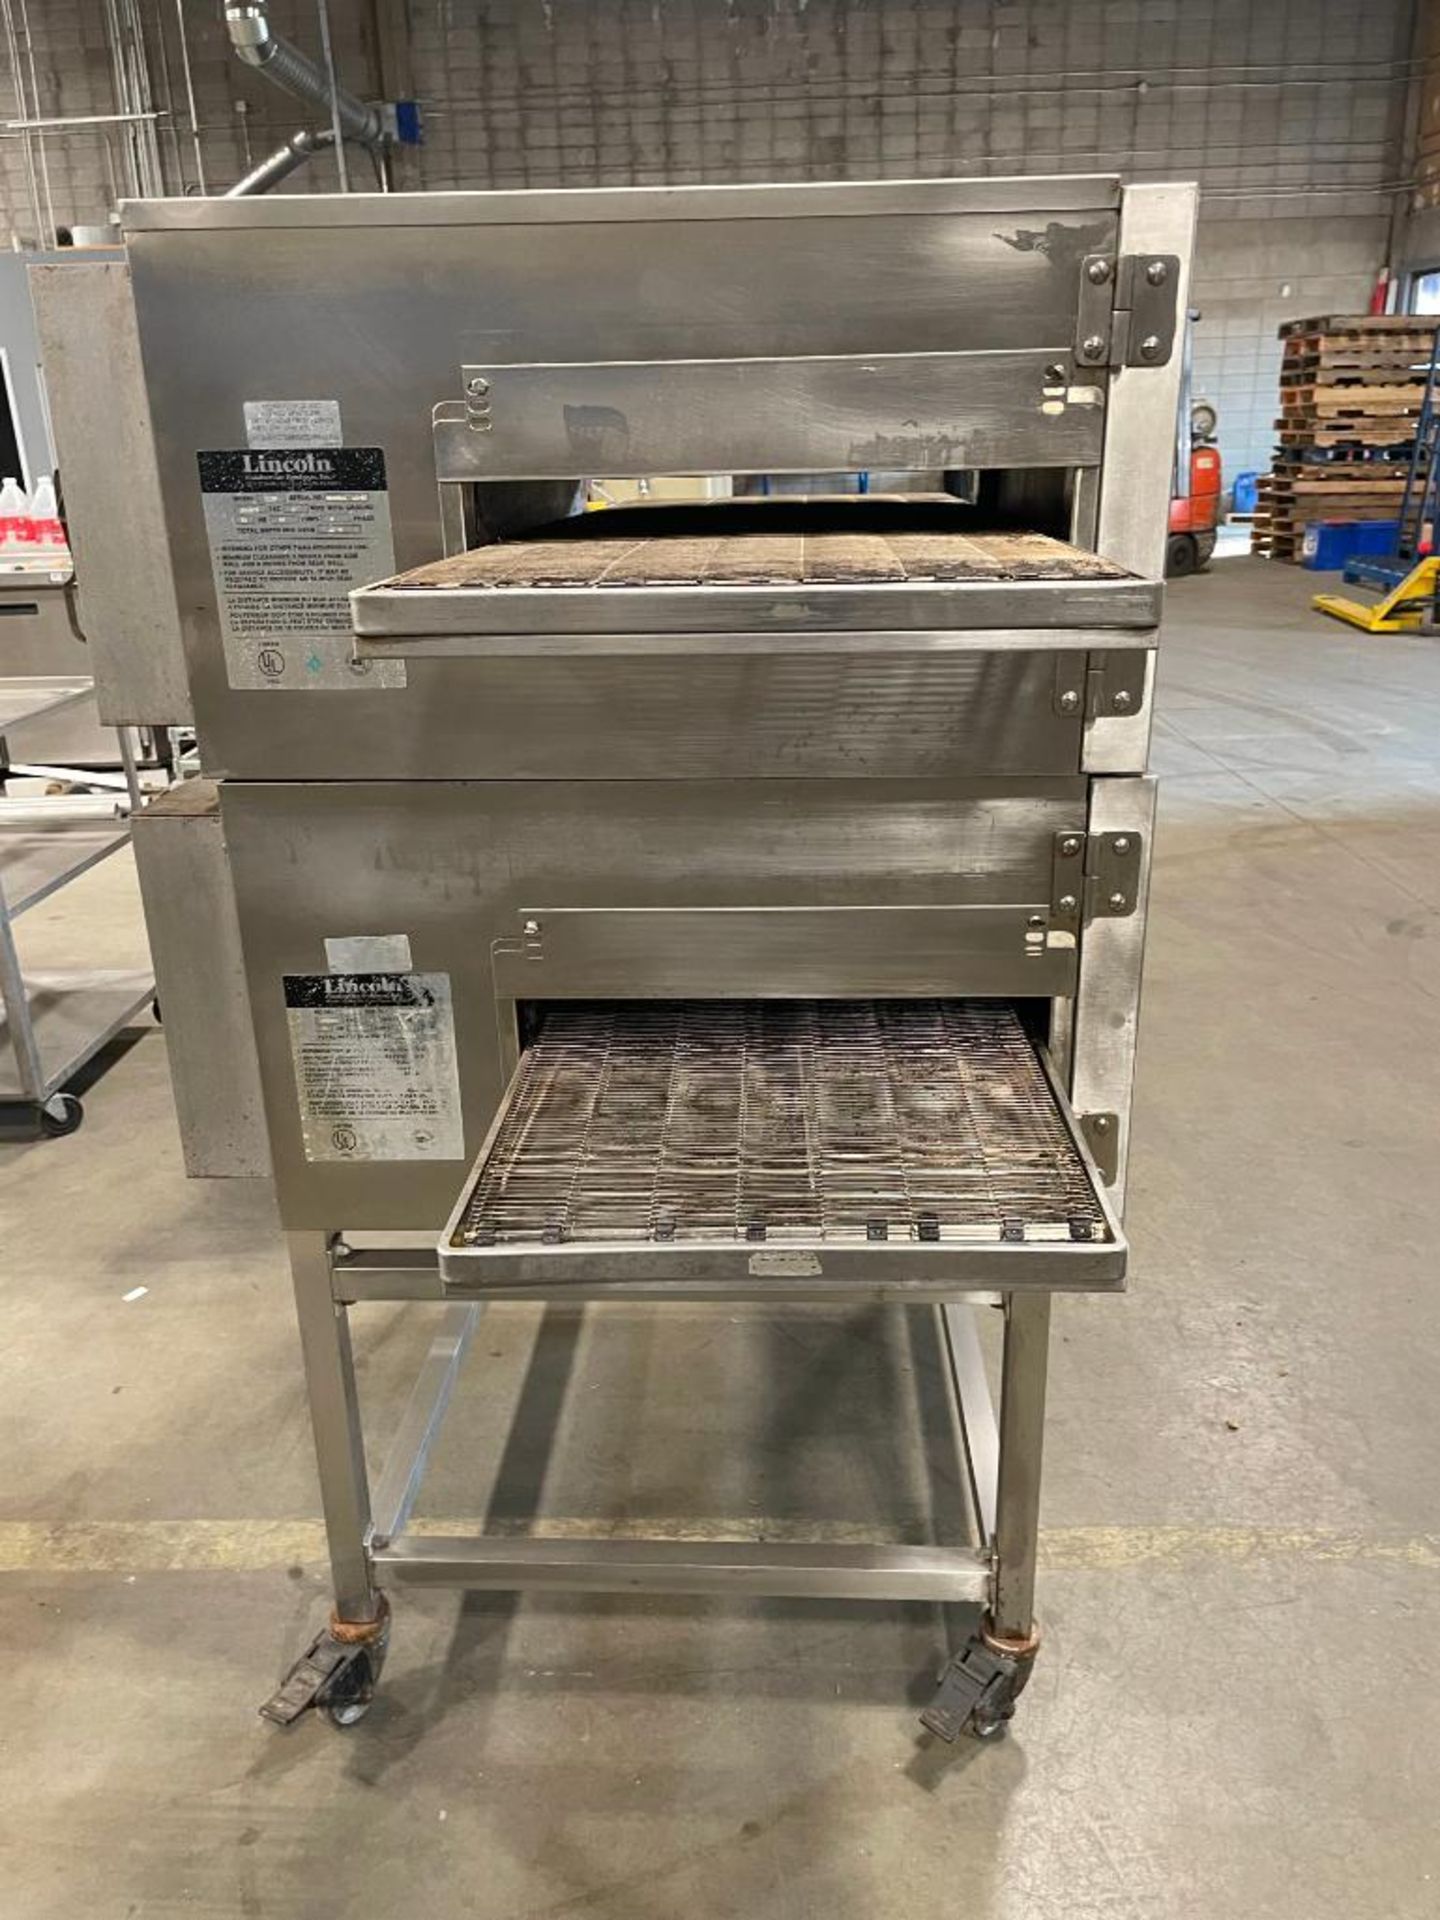 LINCOLN 1132 DOUBLE IMPINGER ELECTRIC CONVEYOR PIZZA OVEN - Image 11 of 13